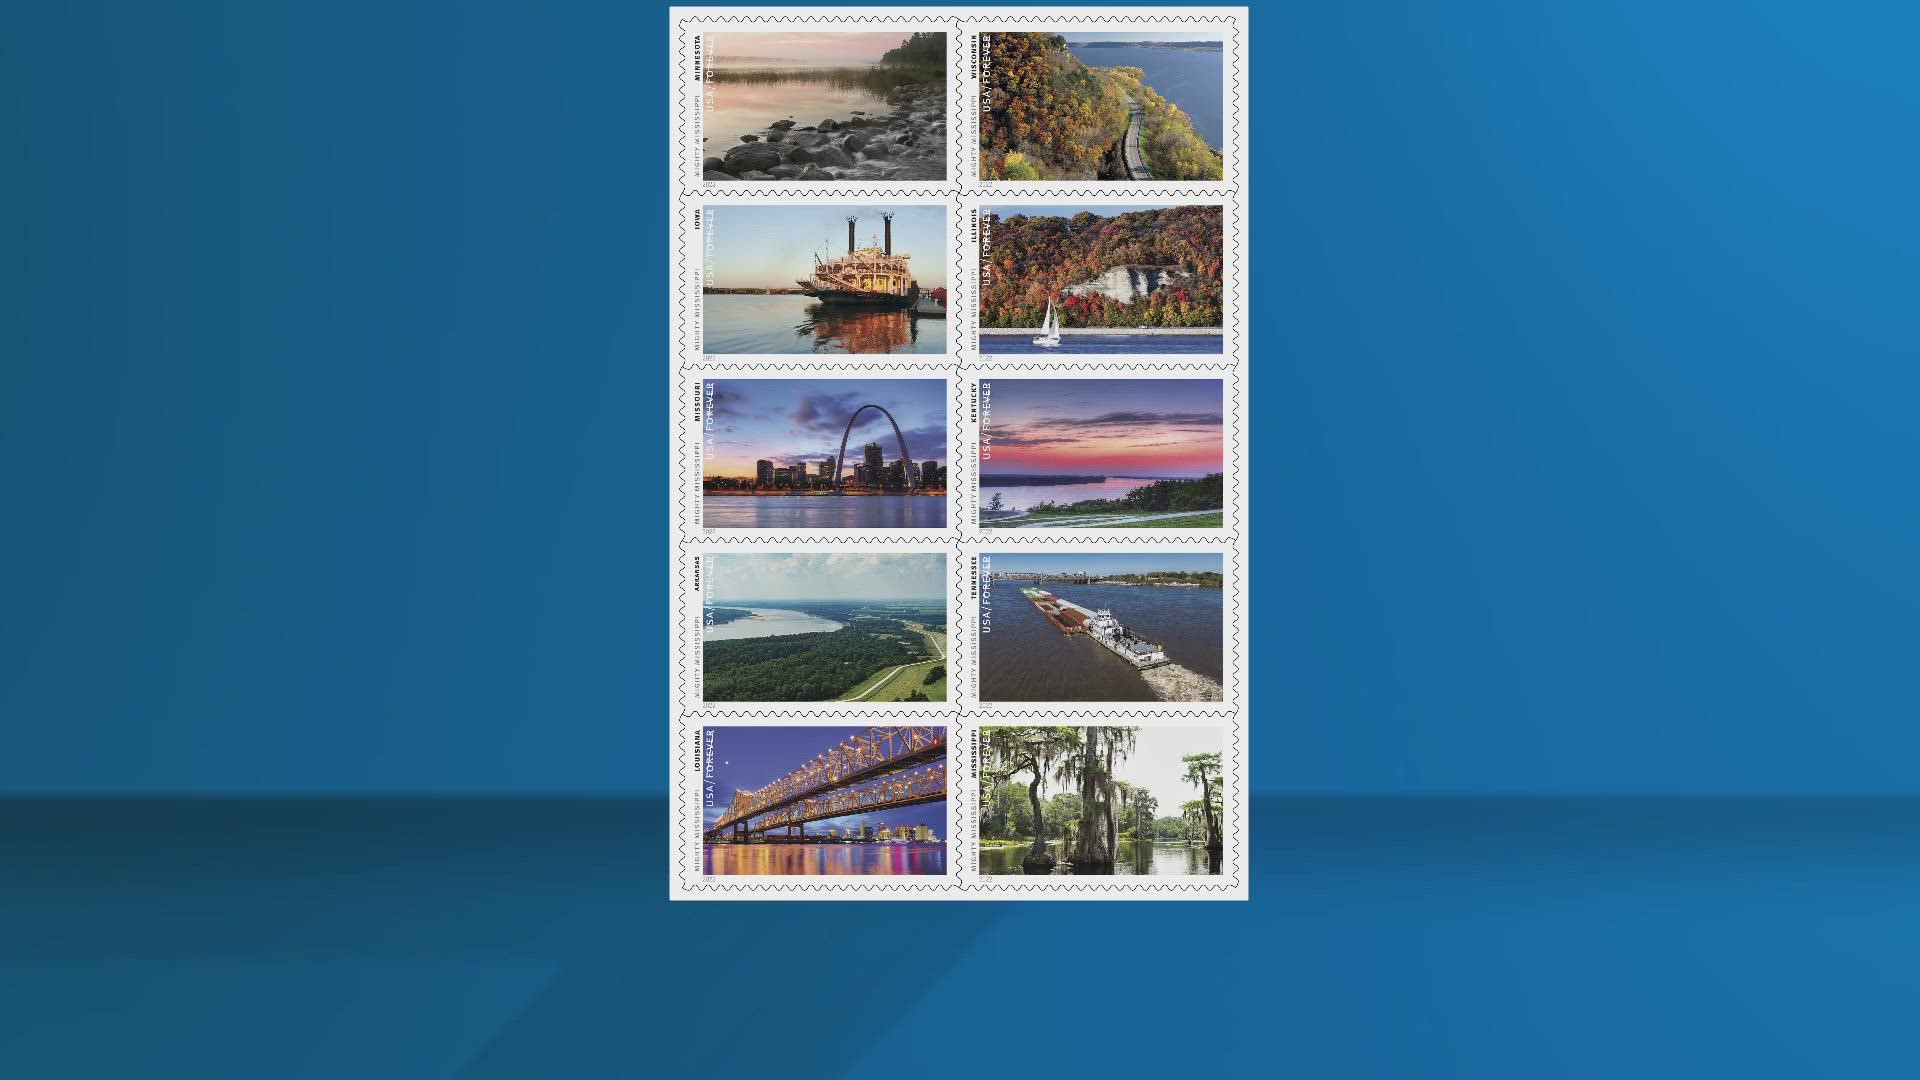 The 10 different stamps will follow the river's course from north to south. They'll be released Monday, May 23.